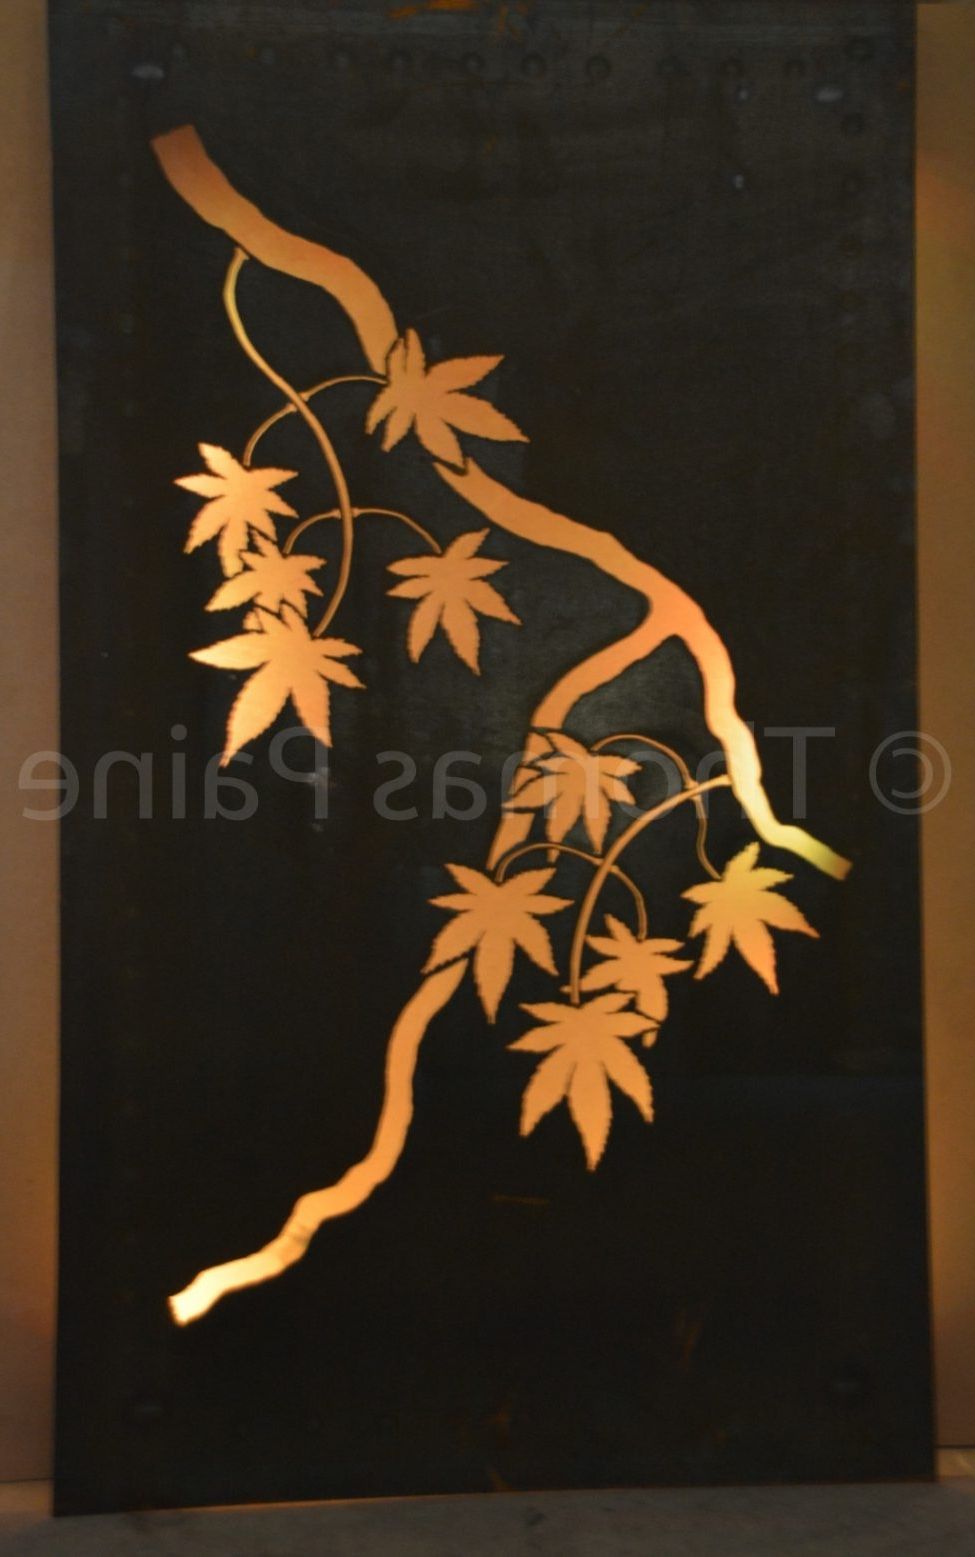 Japanese Wall Art Panels Pertaining To Famous Wall Art Design Ideas: Fresh Japanese Wall Art Panels 78 In Art (View 10 of 15)